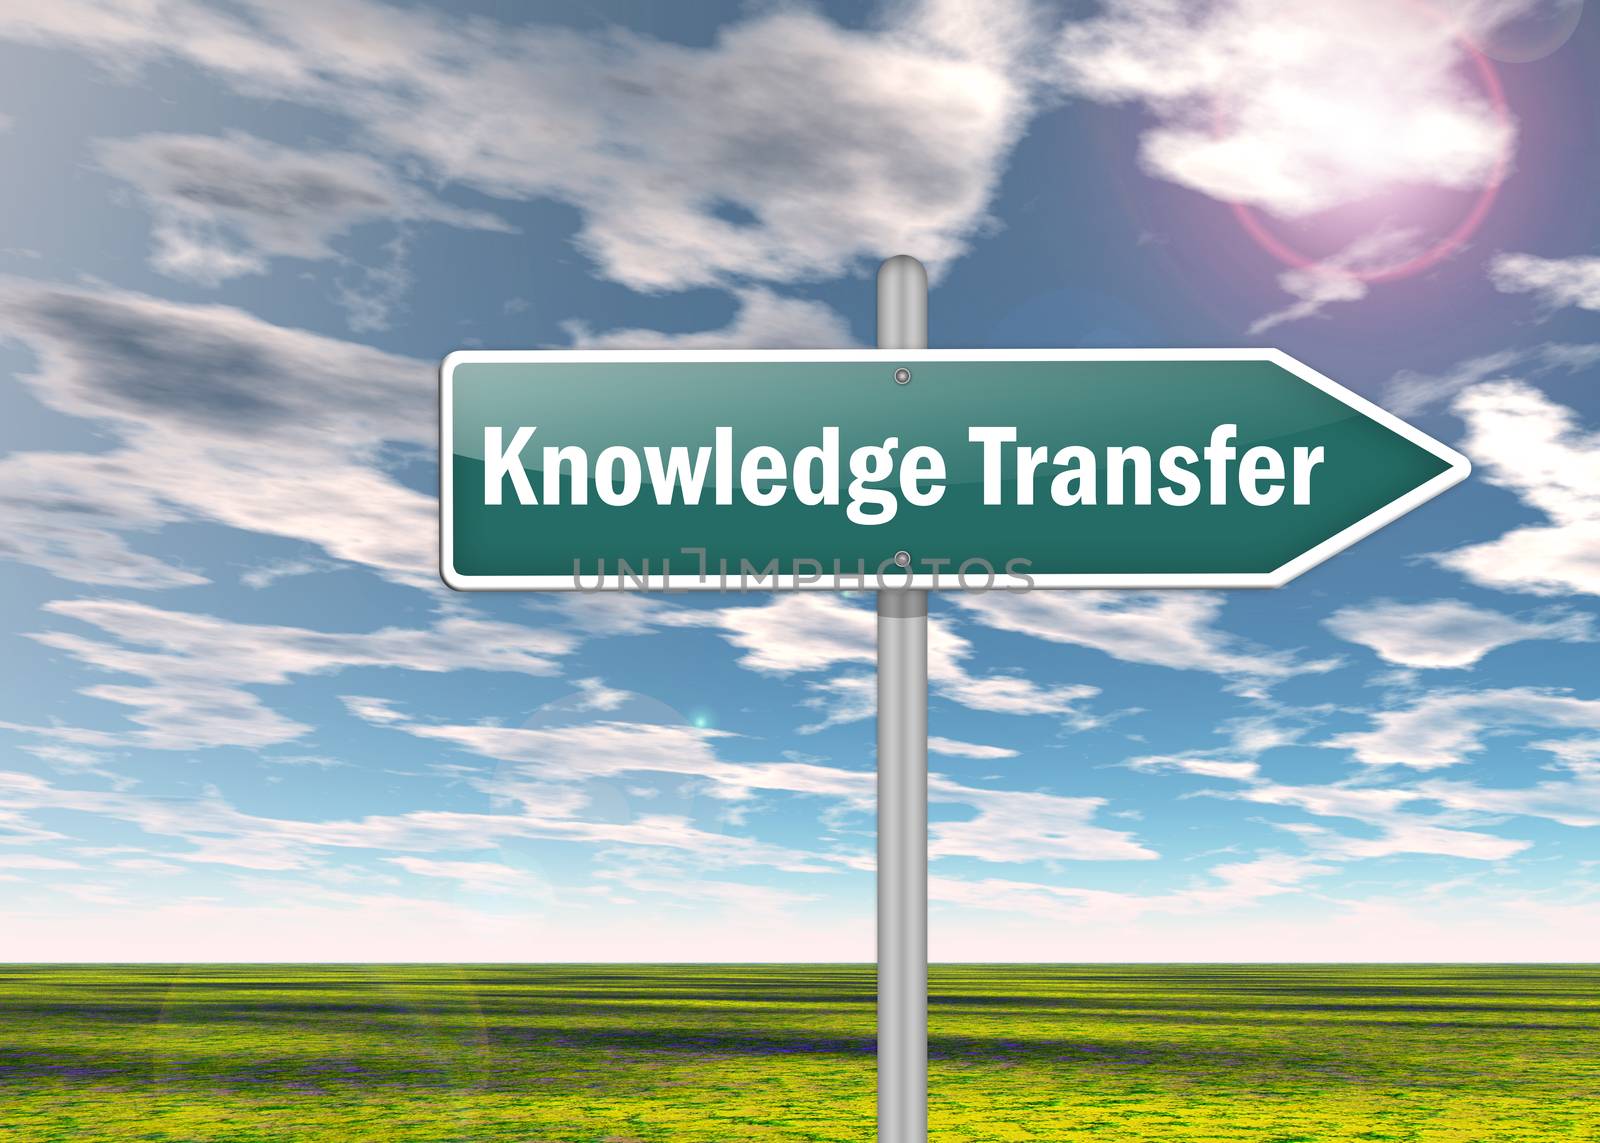 Signpost with Knowledge Transfer wording